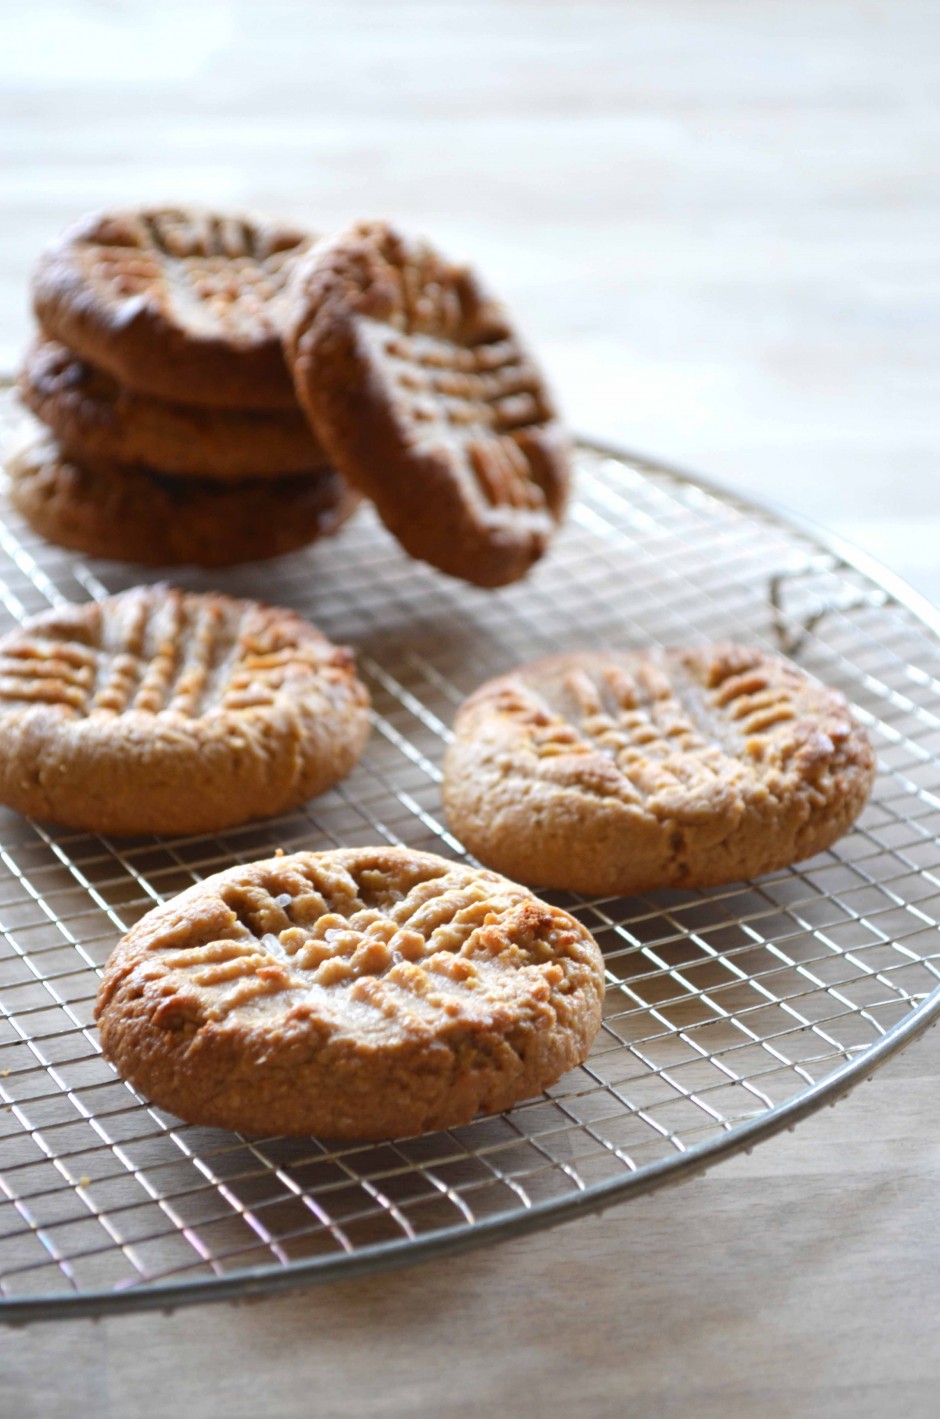 Salted peanut butter cookies. Photo and recipe by That Healthy Kitchen